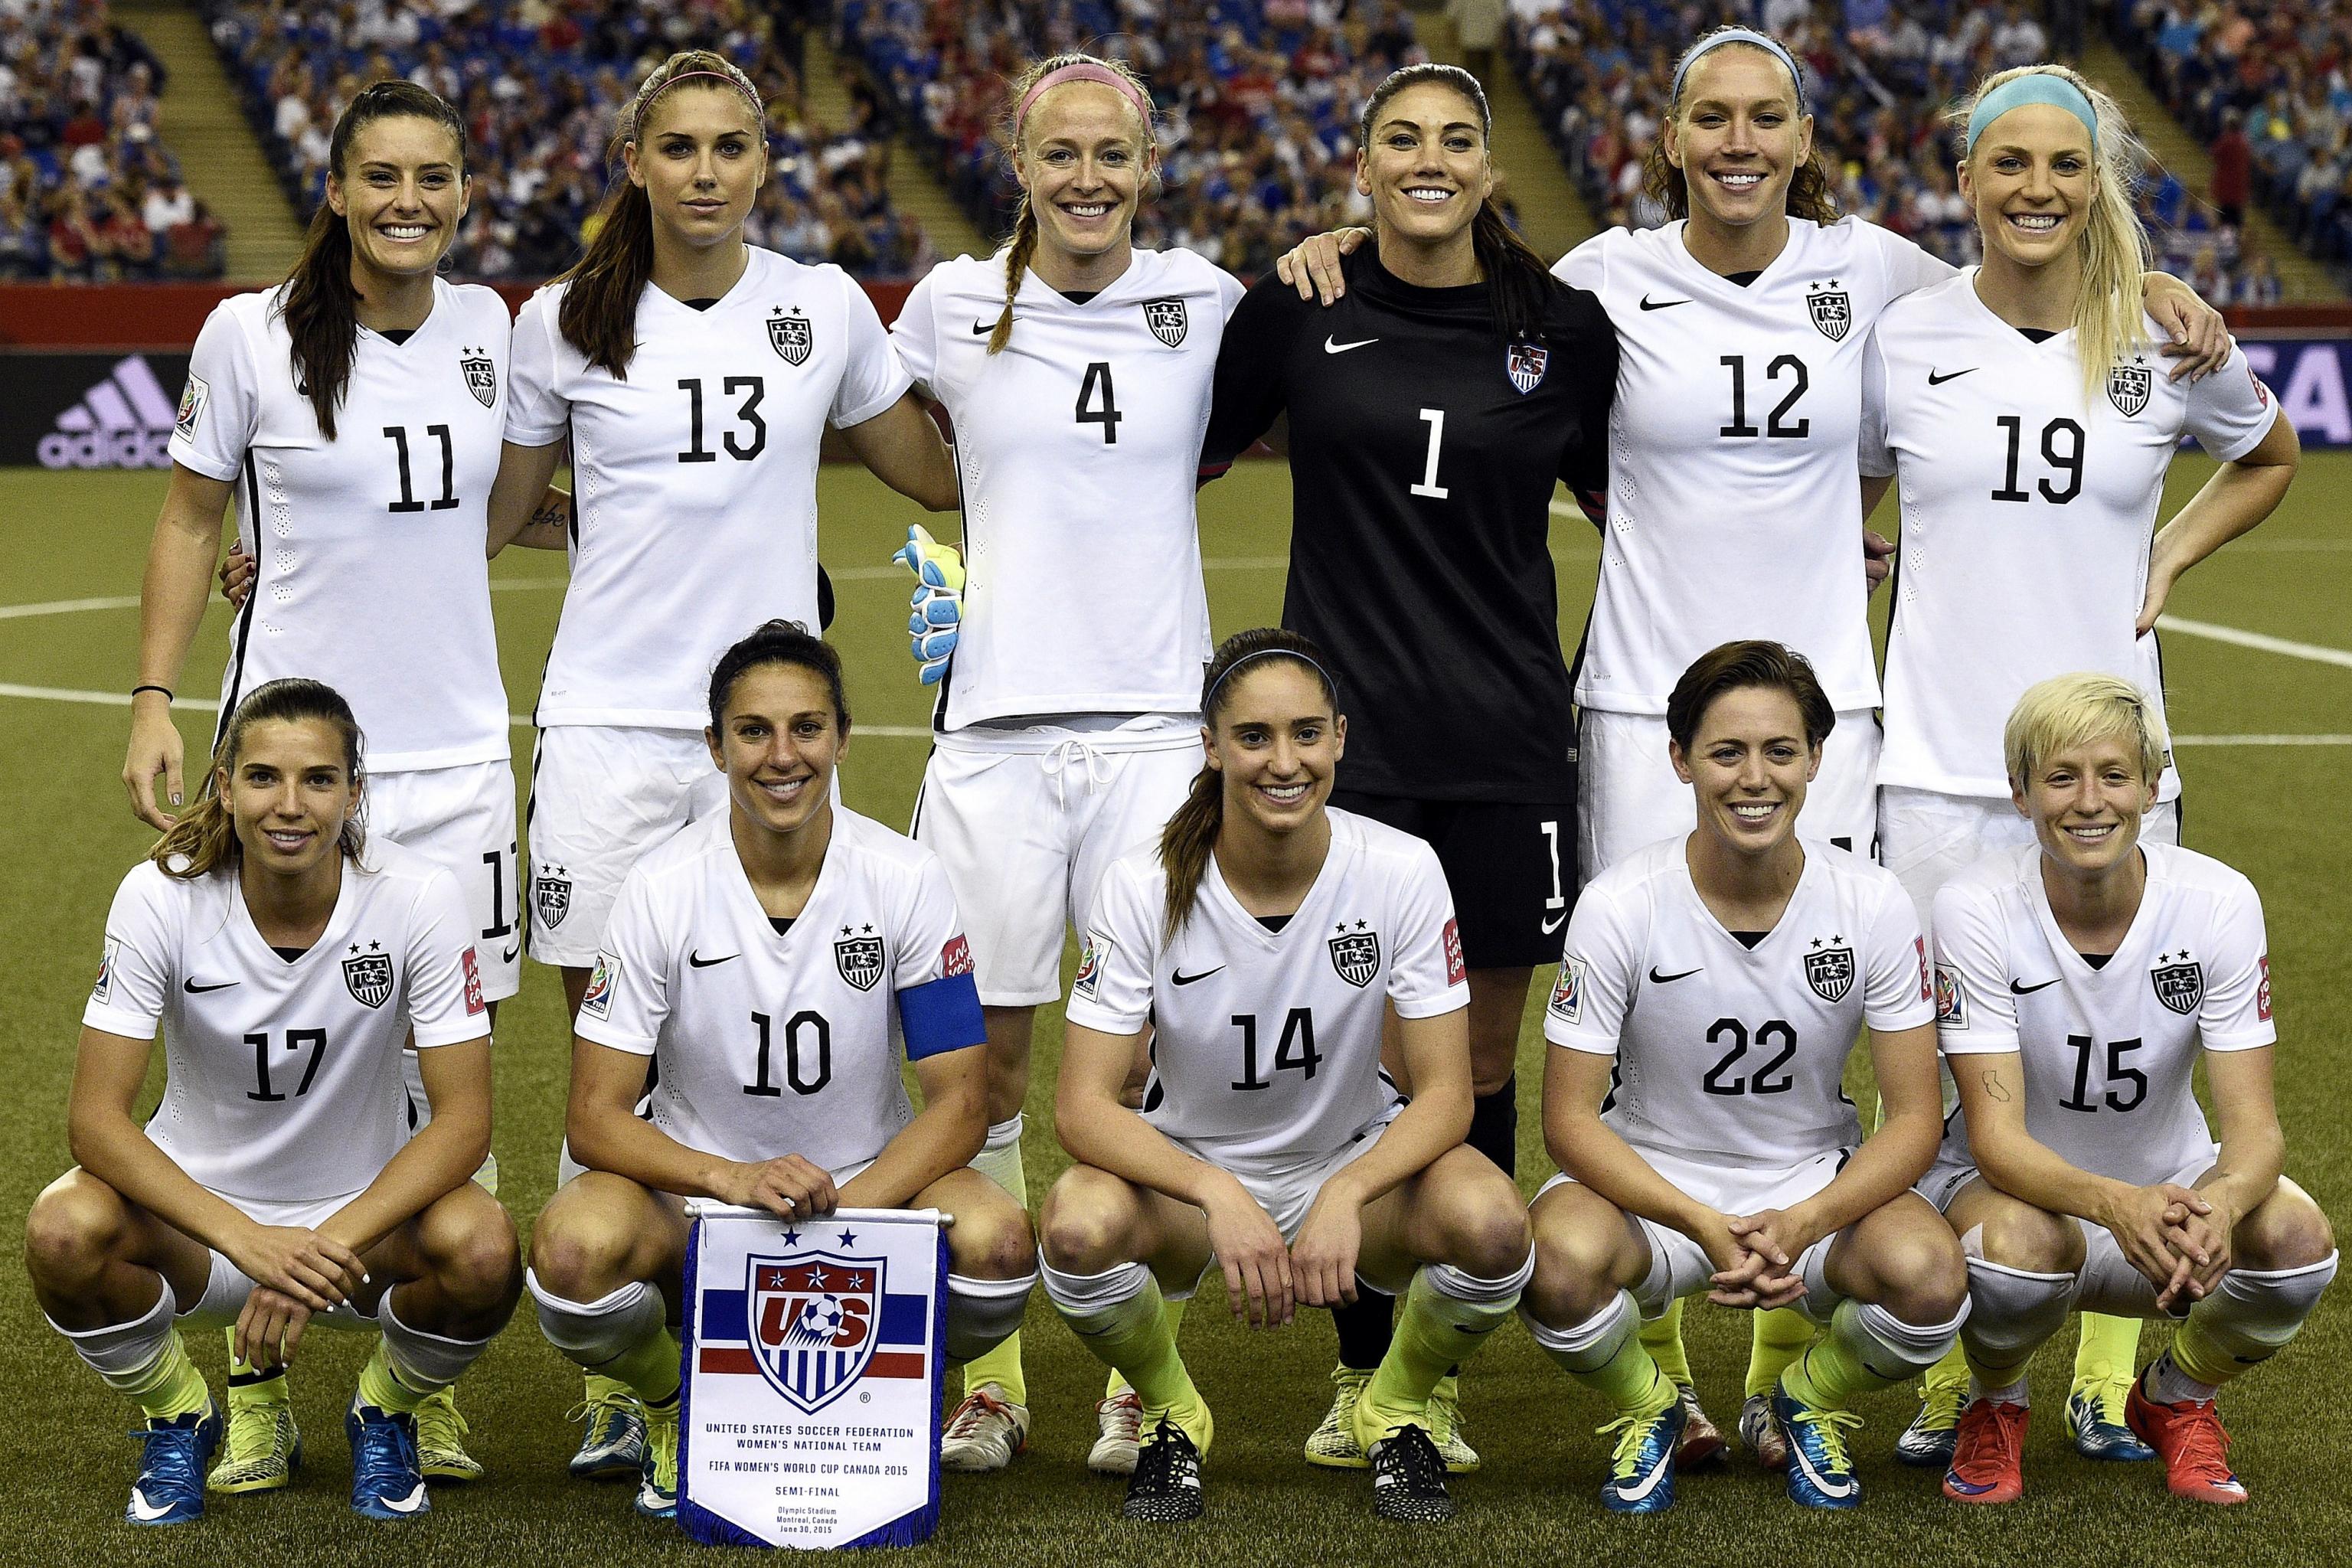 Us Women S Soccer Team Files Wage Discrimination Suit Against Us Soccer Bleacher Report Latest News Videos And Highlights